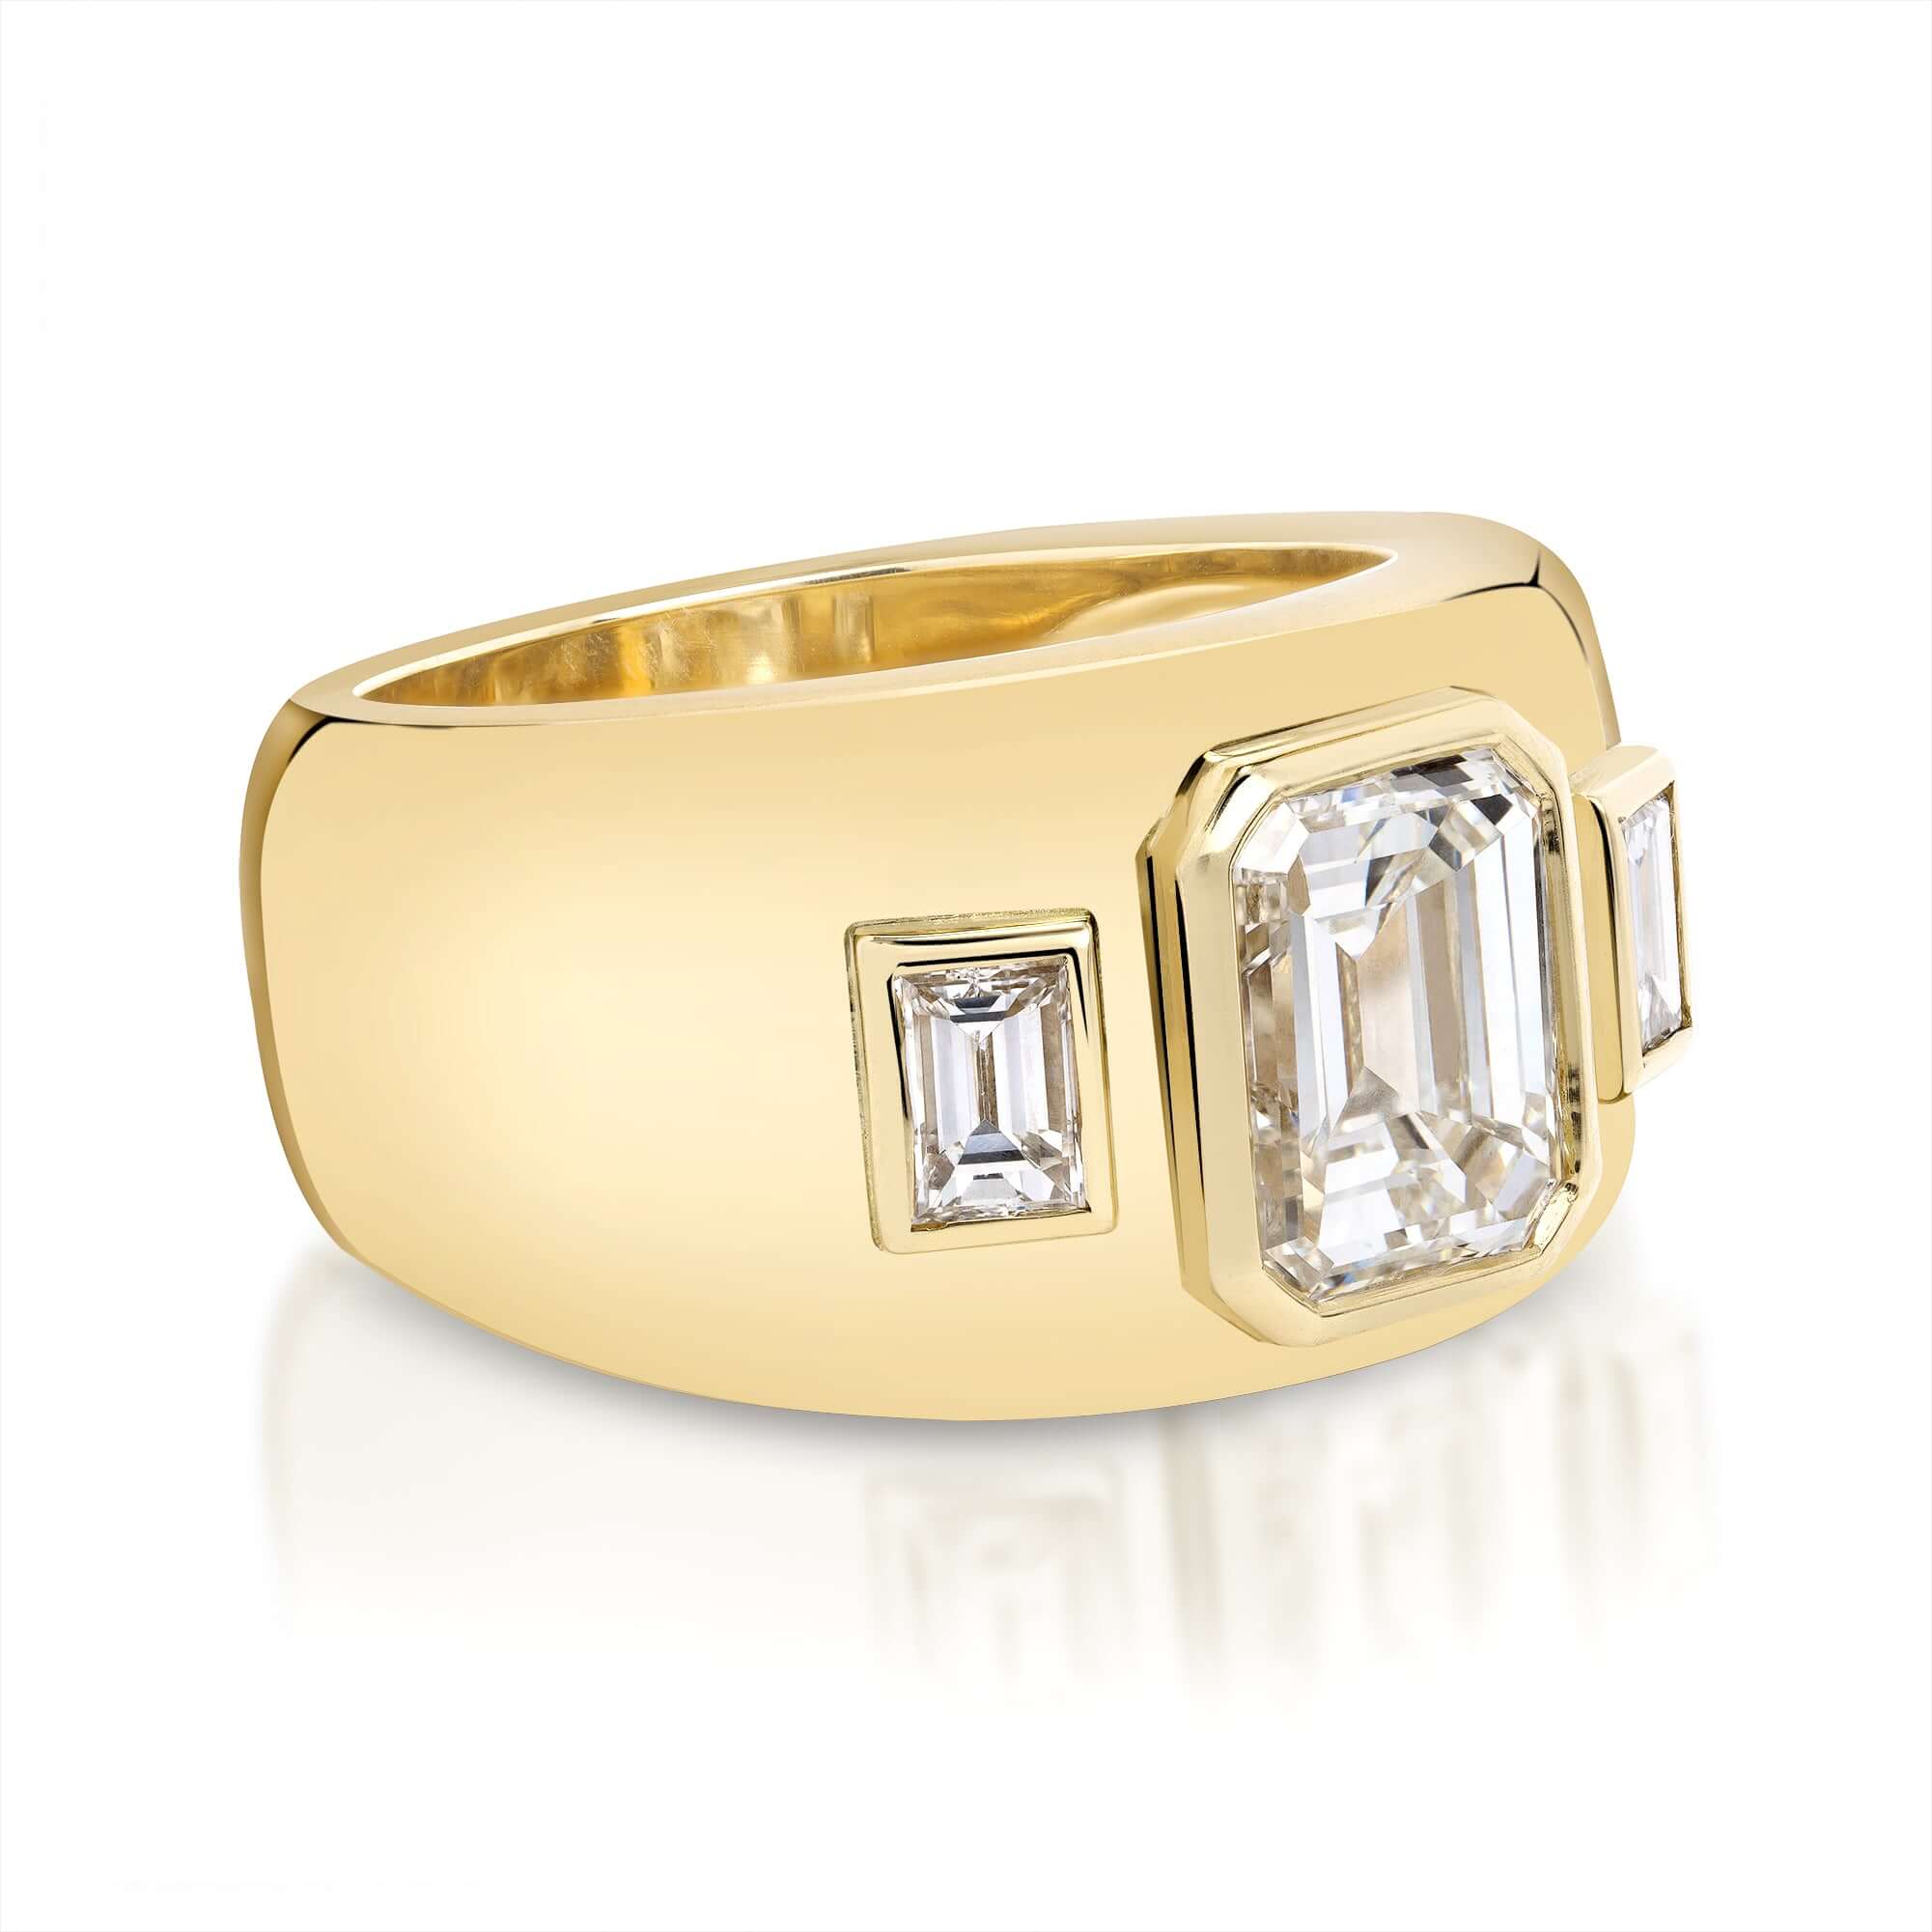 SINGLE STONE BEAUX RING featuring 2.02ct K/VVS1 GIA certified emerald cut diamond with 0.34ctw baguette cut accent diamonds set in a handcrafted 18K yellow gold mounting.